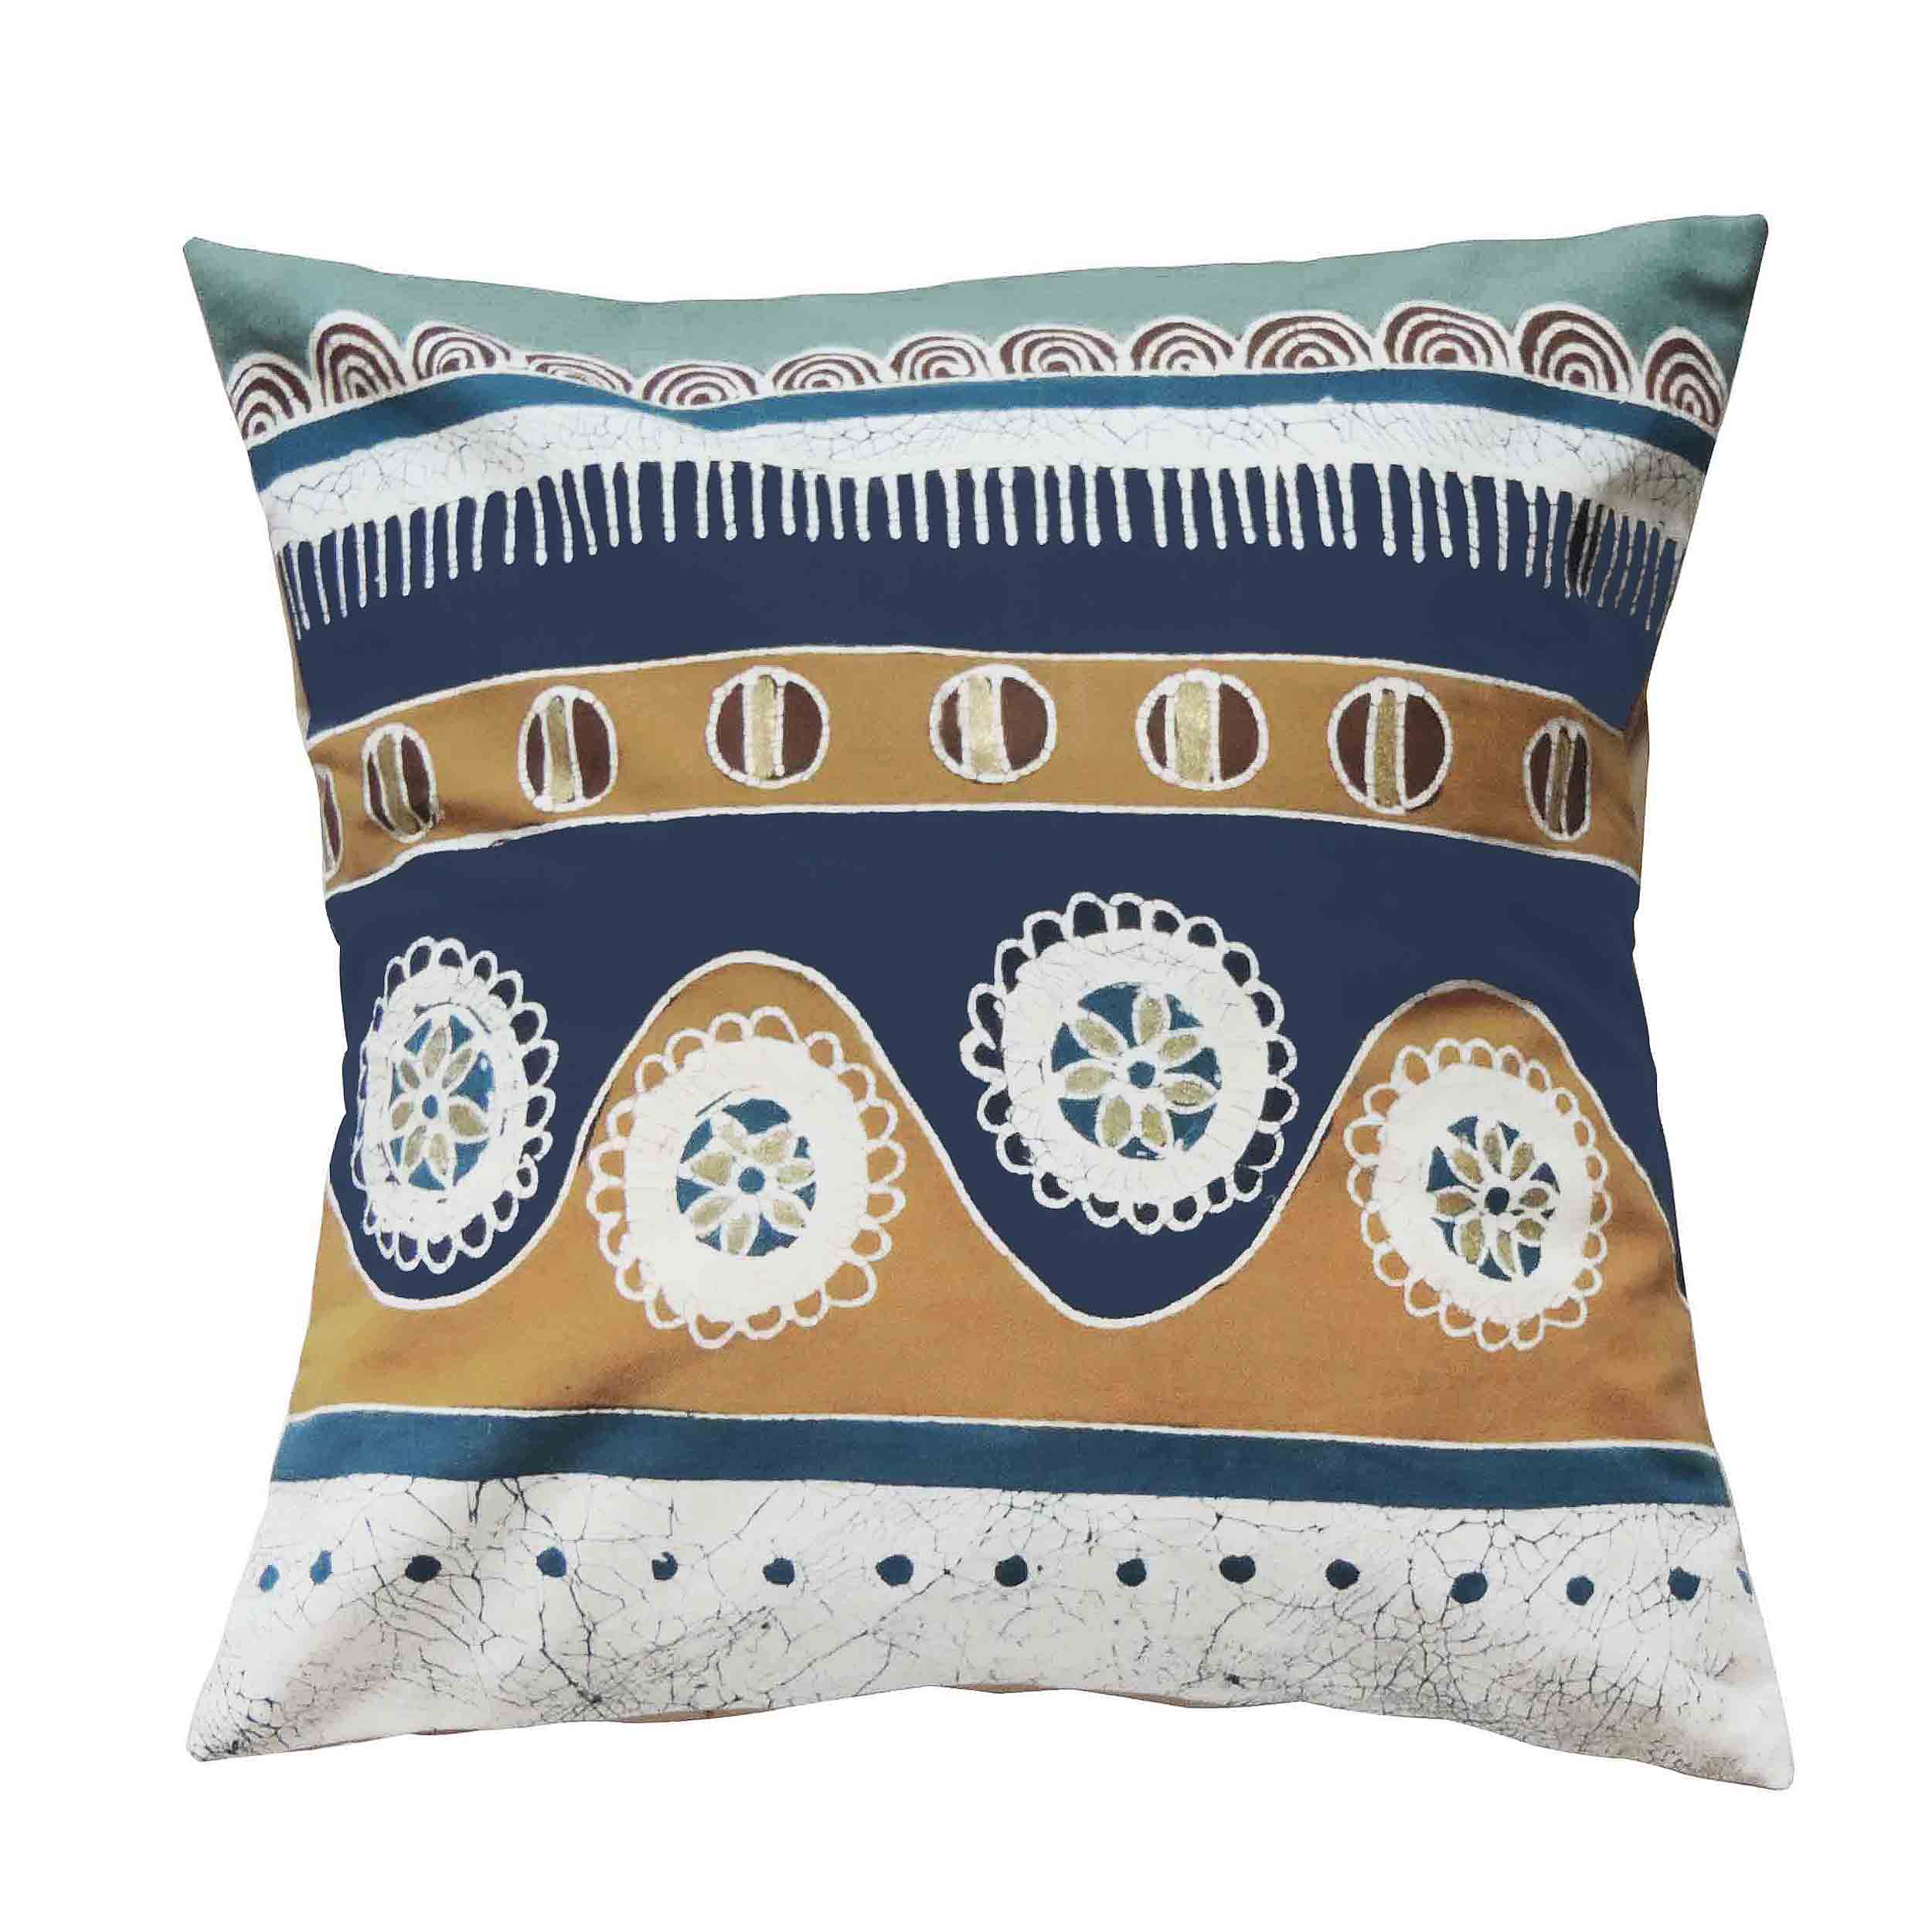 Mali Azure Wiggle Cushion Cover - Hand Painted by TRIBAL TEXTILES - Handcrafted Home Decor Interiors - African Made